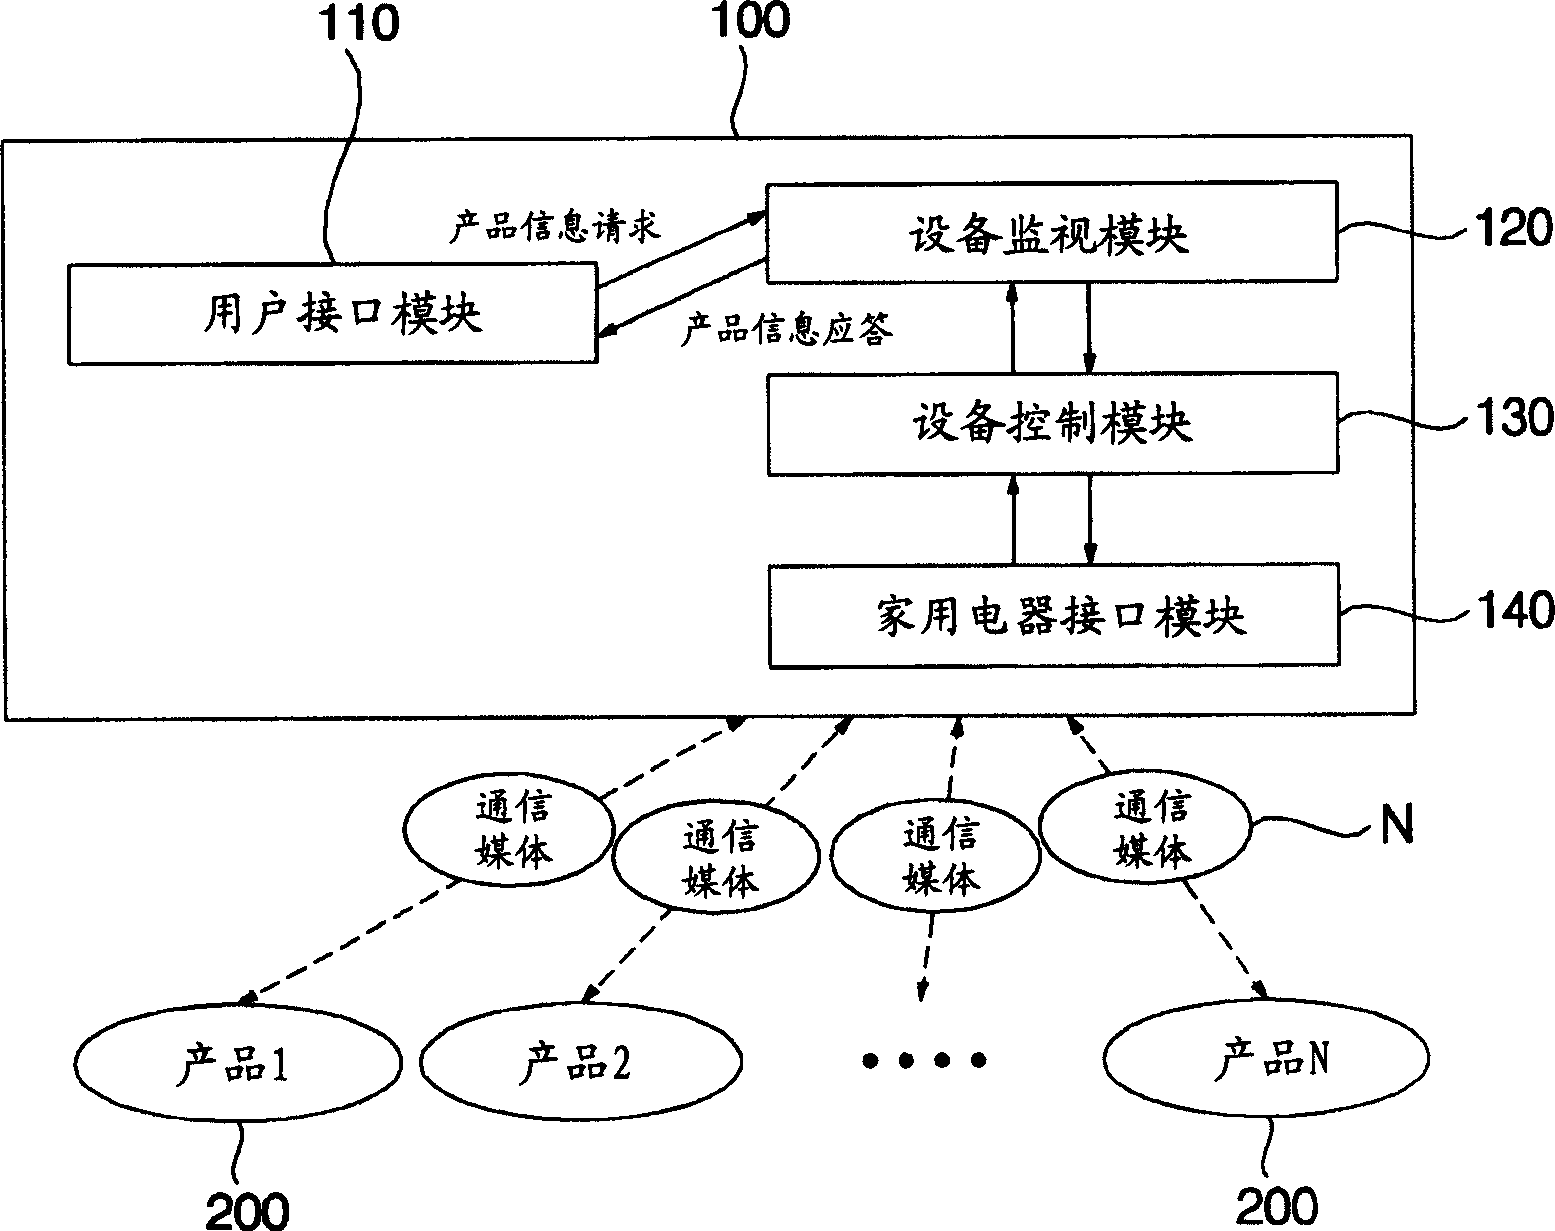 Home appliance network system and method for operating the same